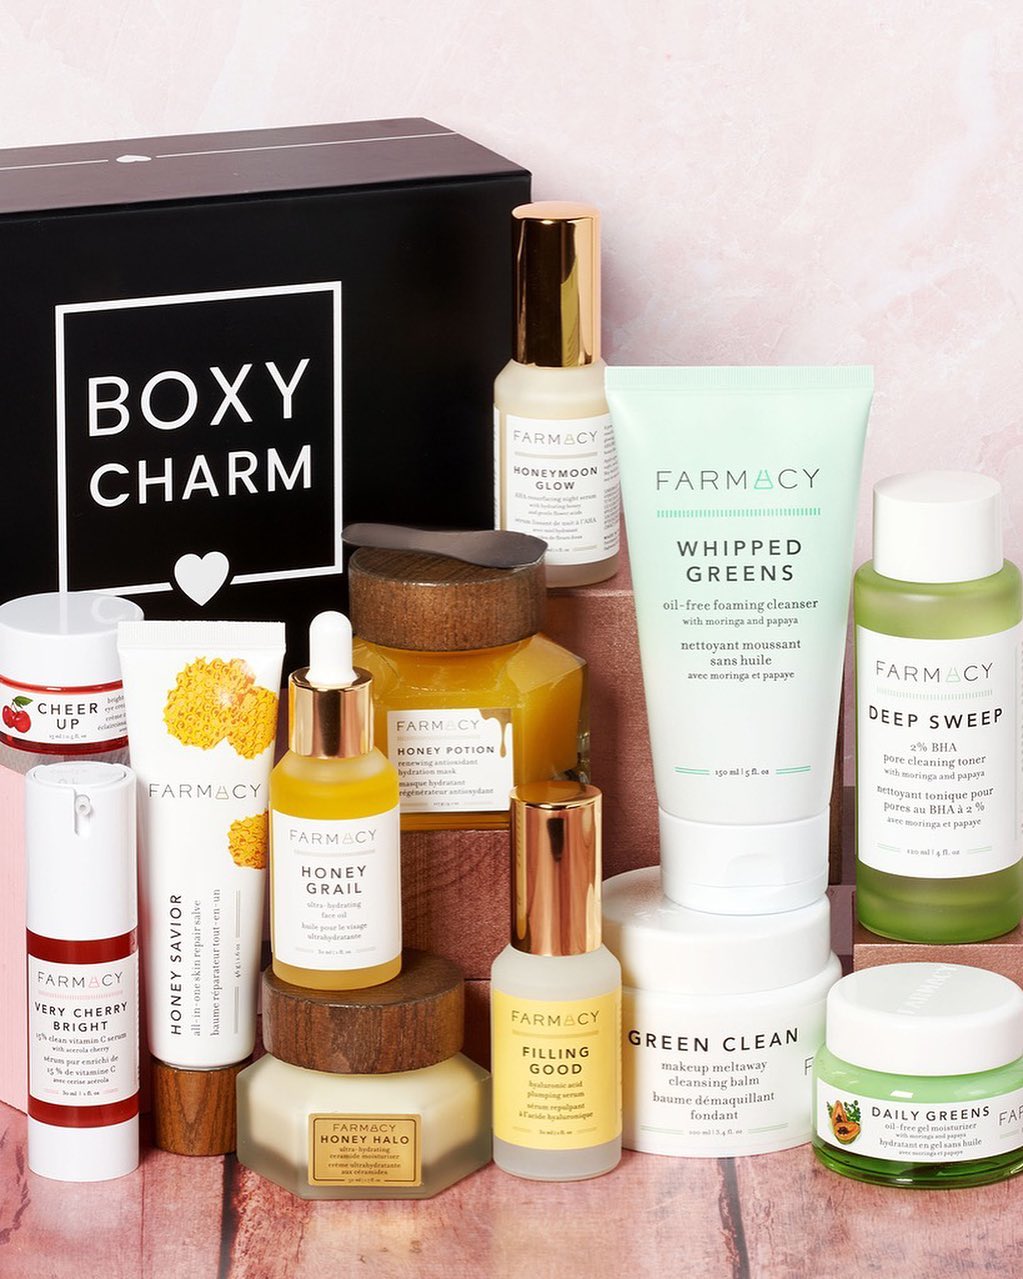 BoxyCharm and Farmacy Beauty Join Forces for $500+ Giveaway